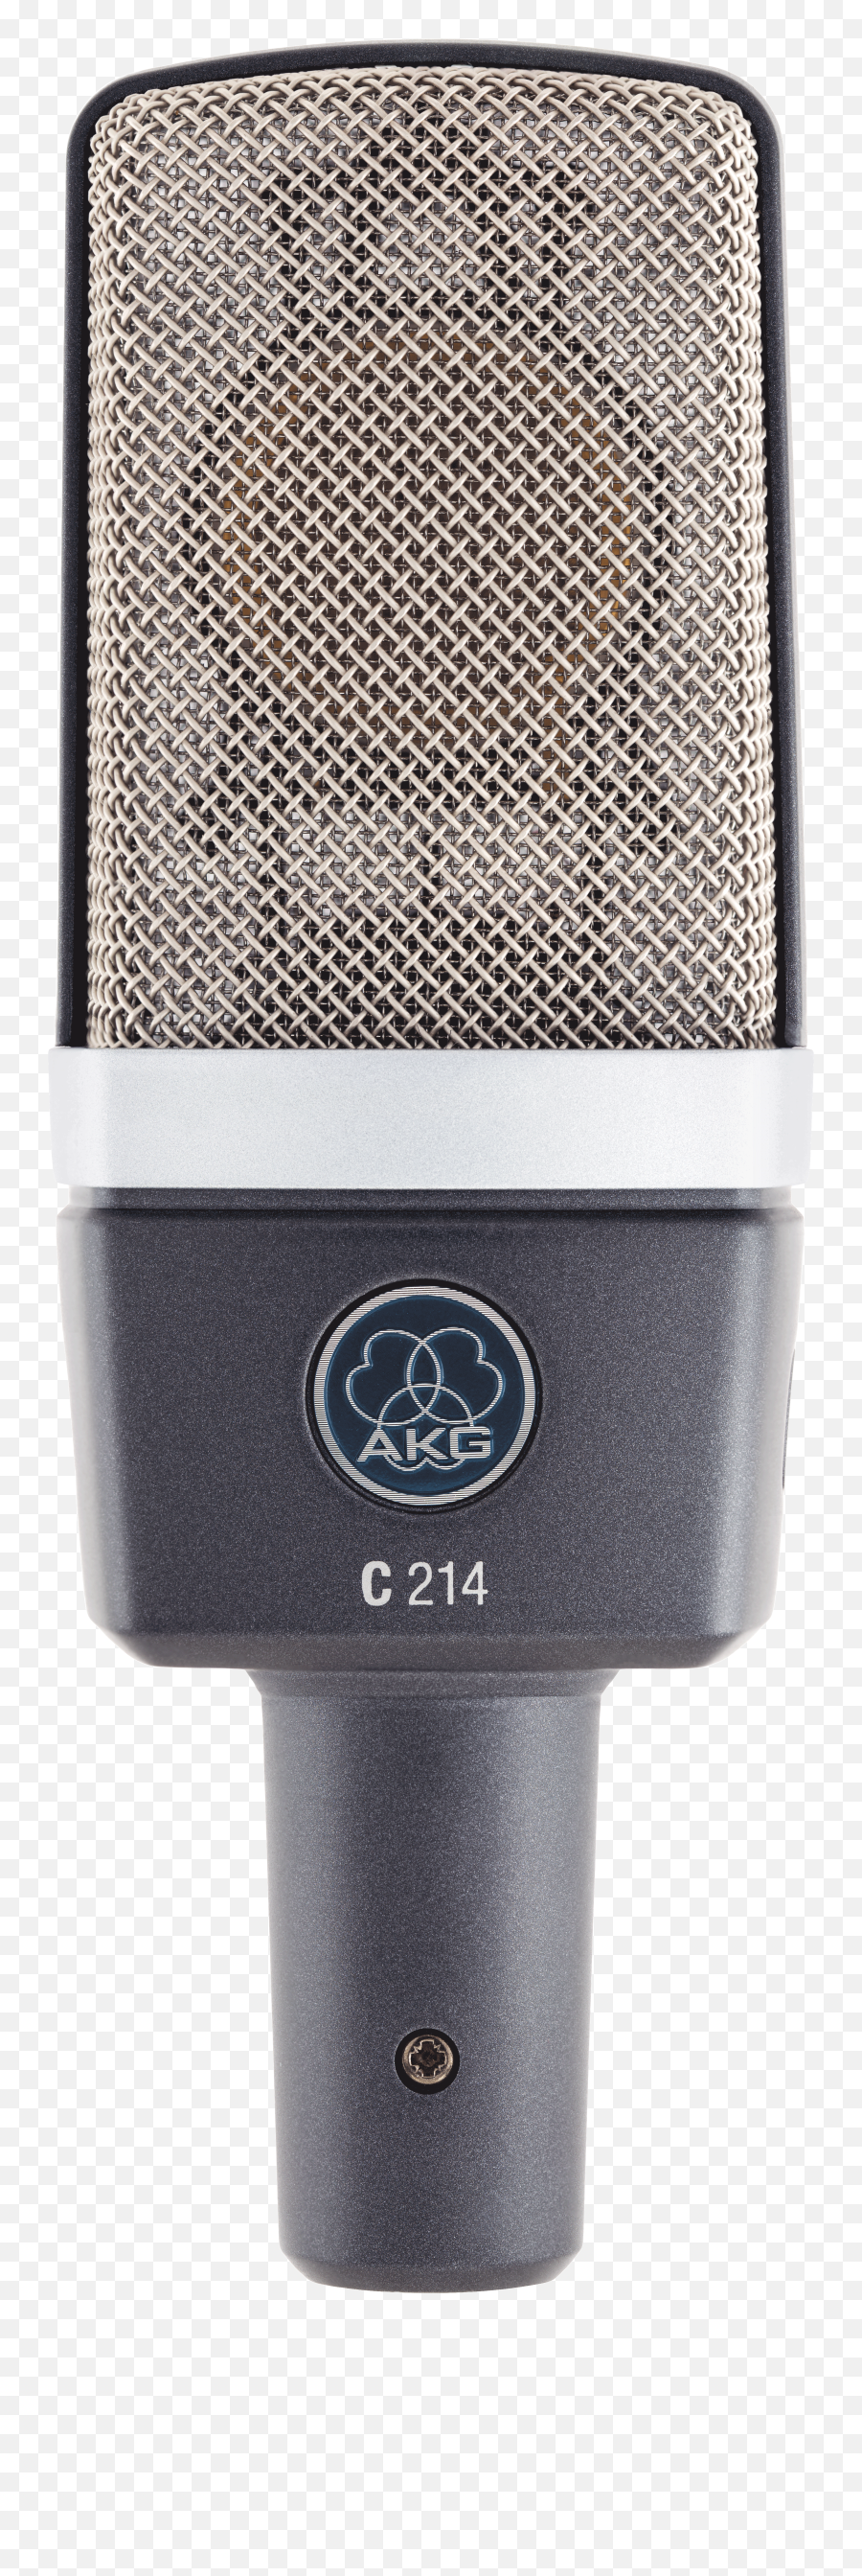 Akg C214 Condenser Microphone - Condenser Microphone Transparent Background Png,Microphone Png